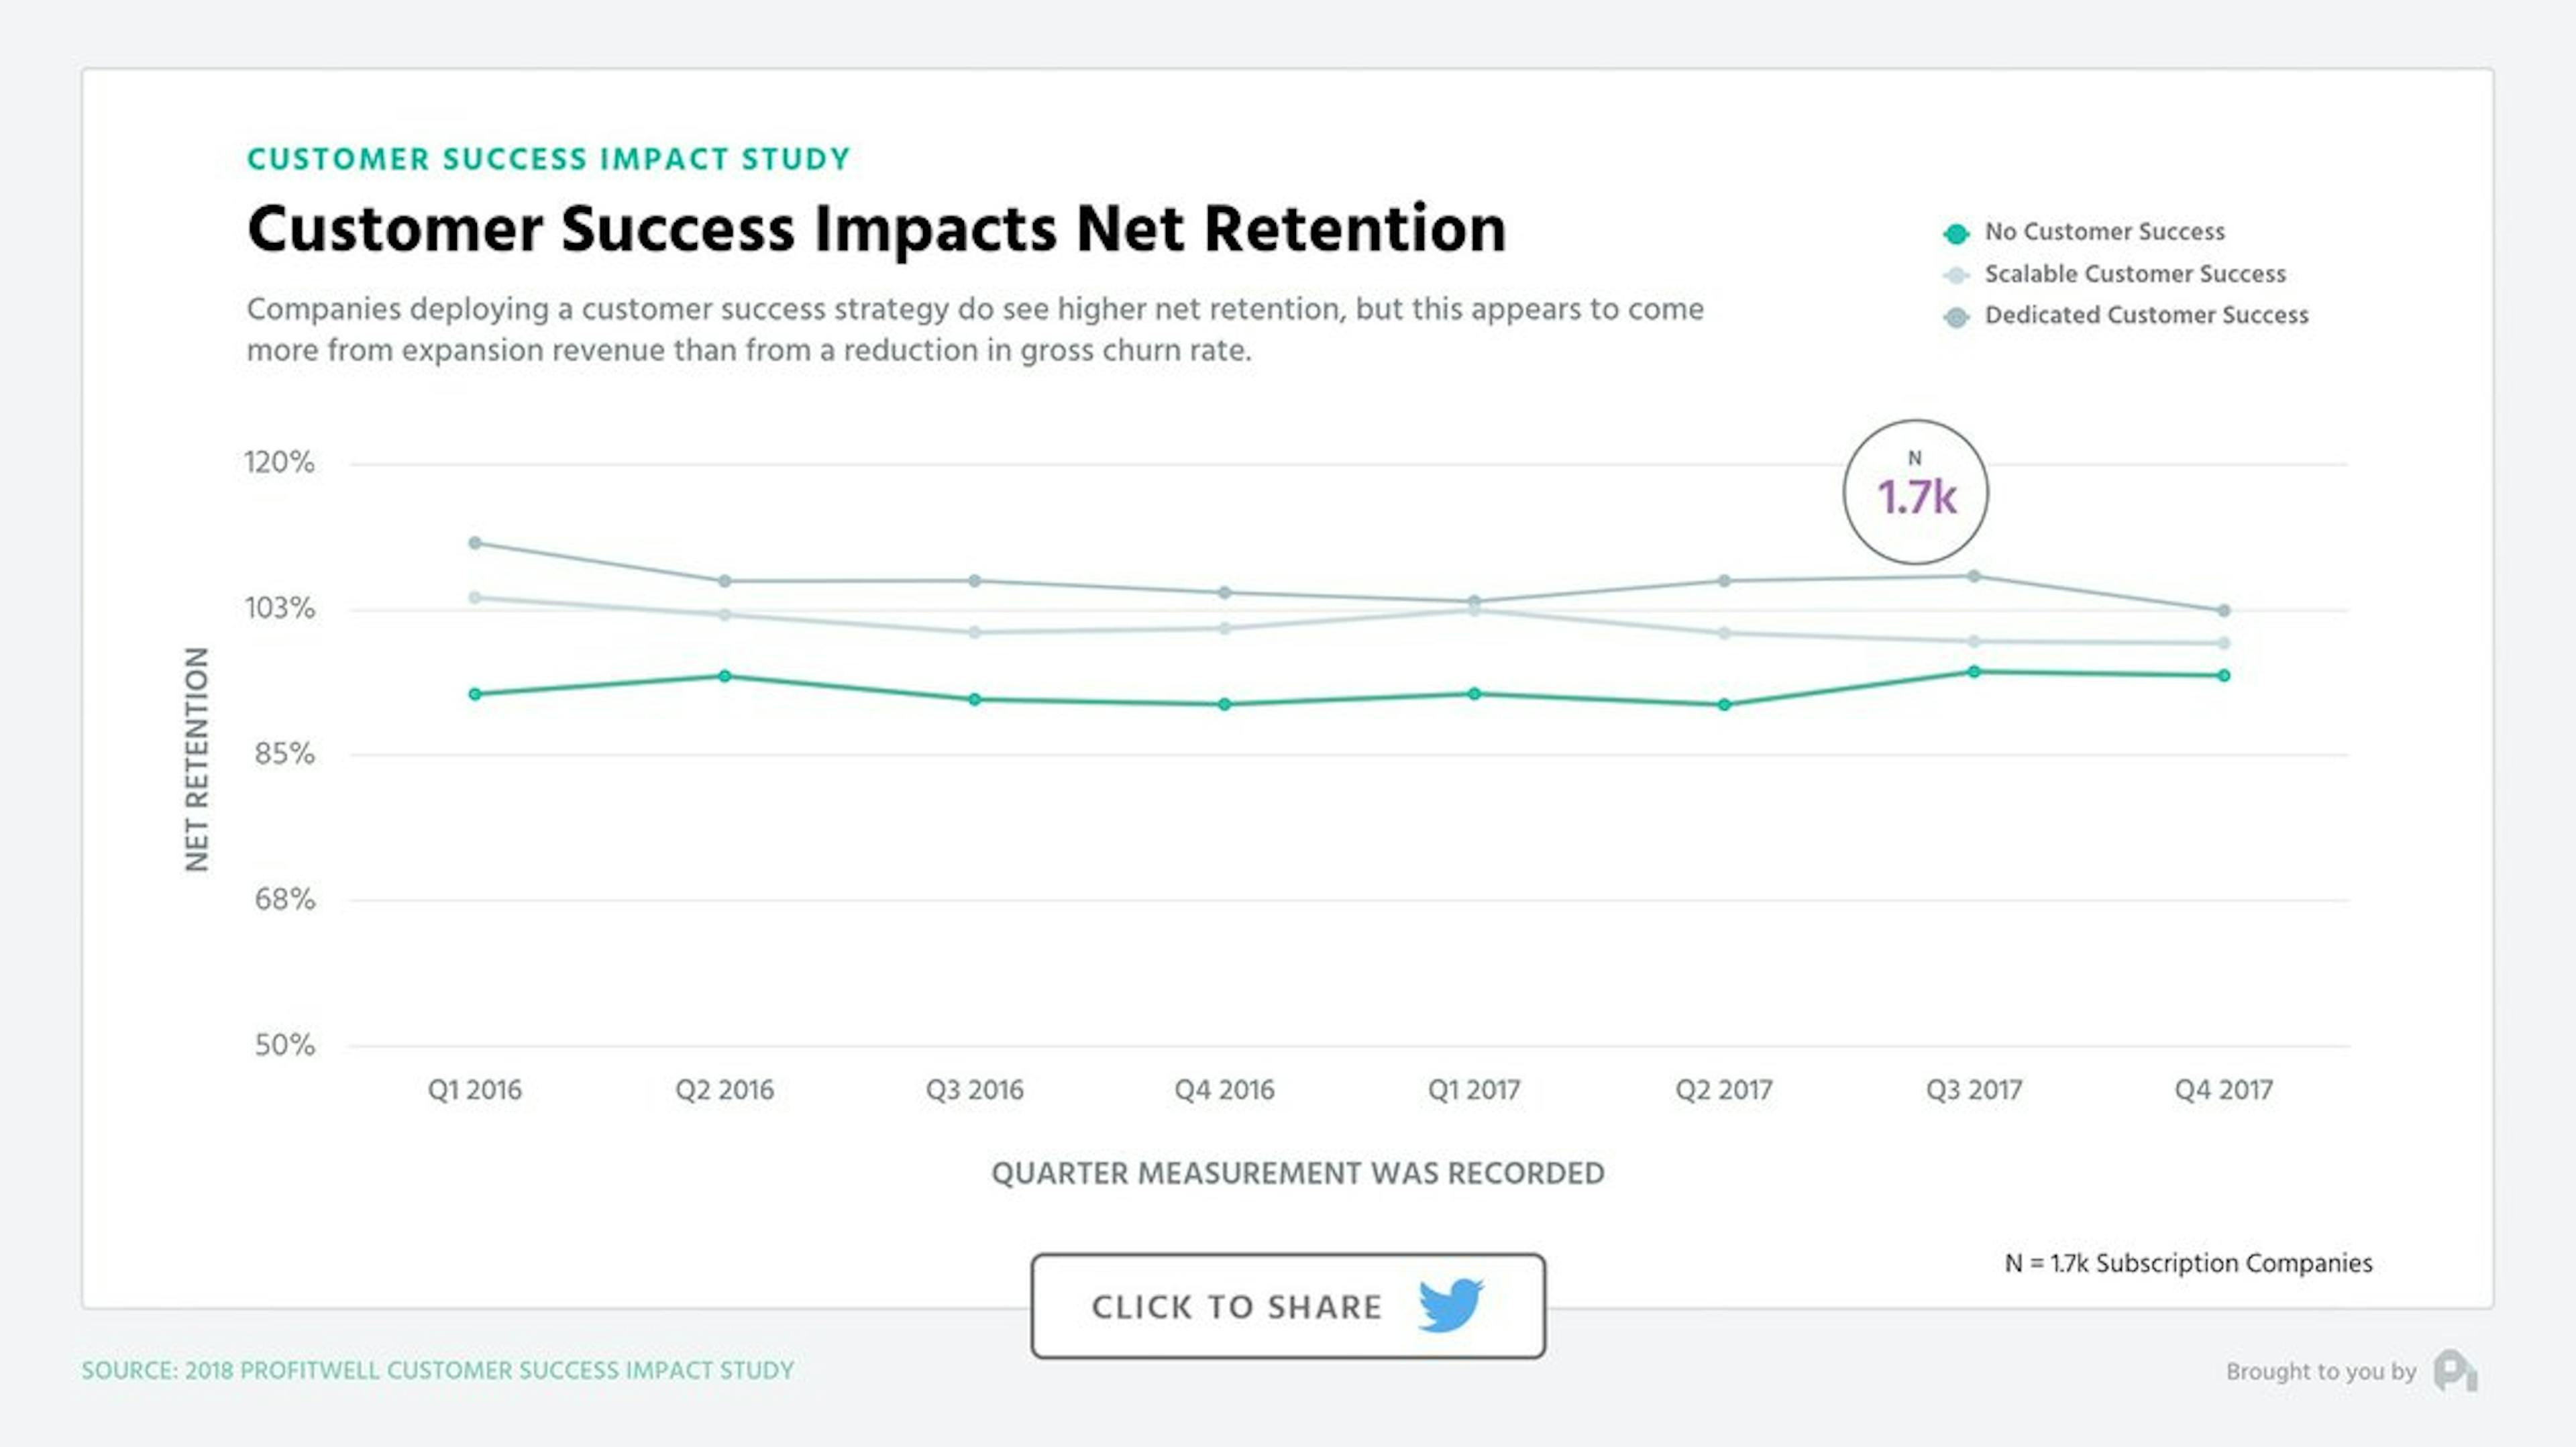 Companies deploying a customer success strategy do see higher net retention, but this appears to come more from expansion revenue than reduction in gross churn rate